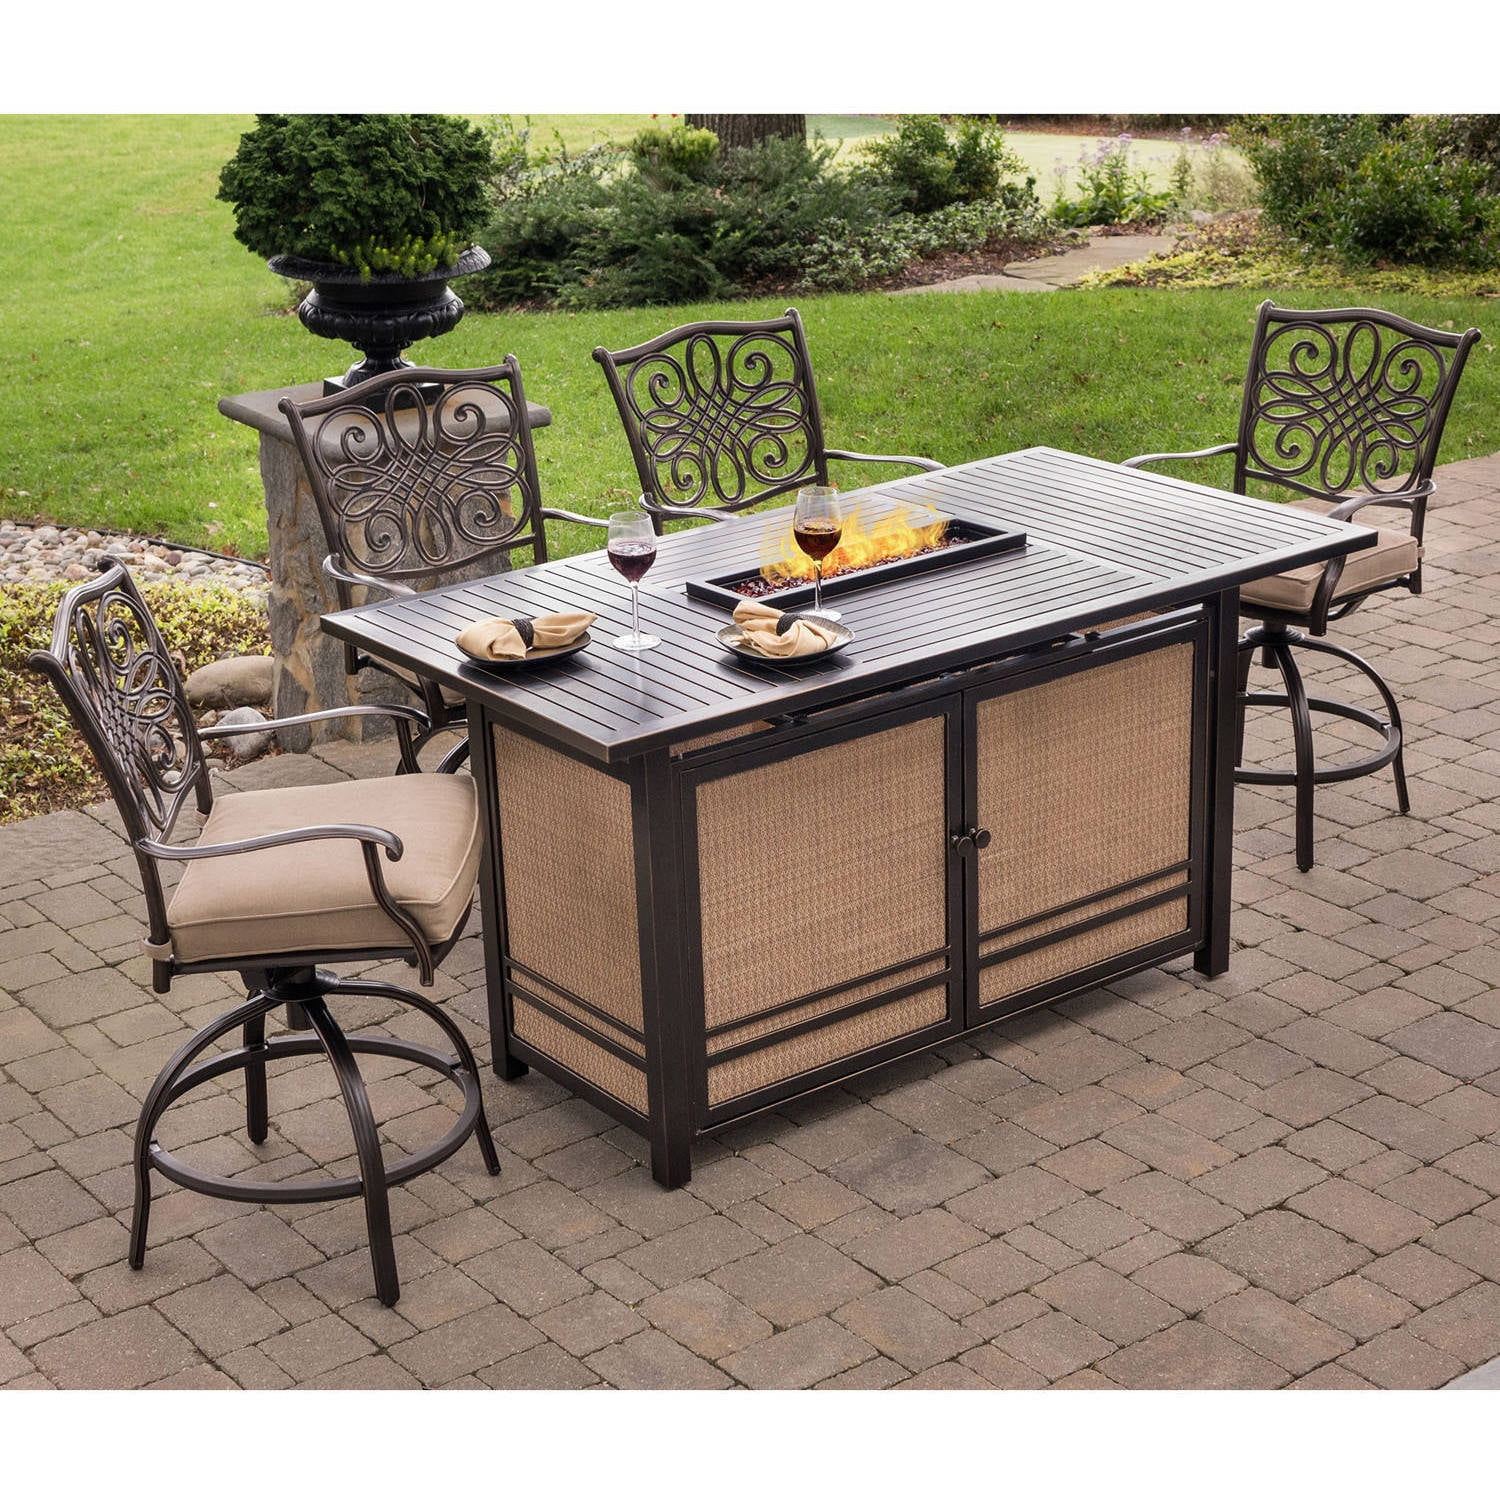 Fire Pit Bar Set, Tall Fire Pit Table With Chairs